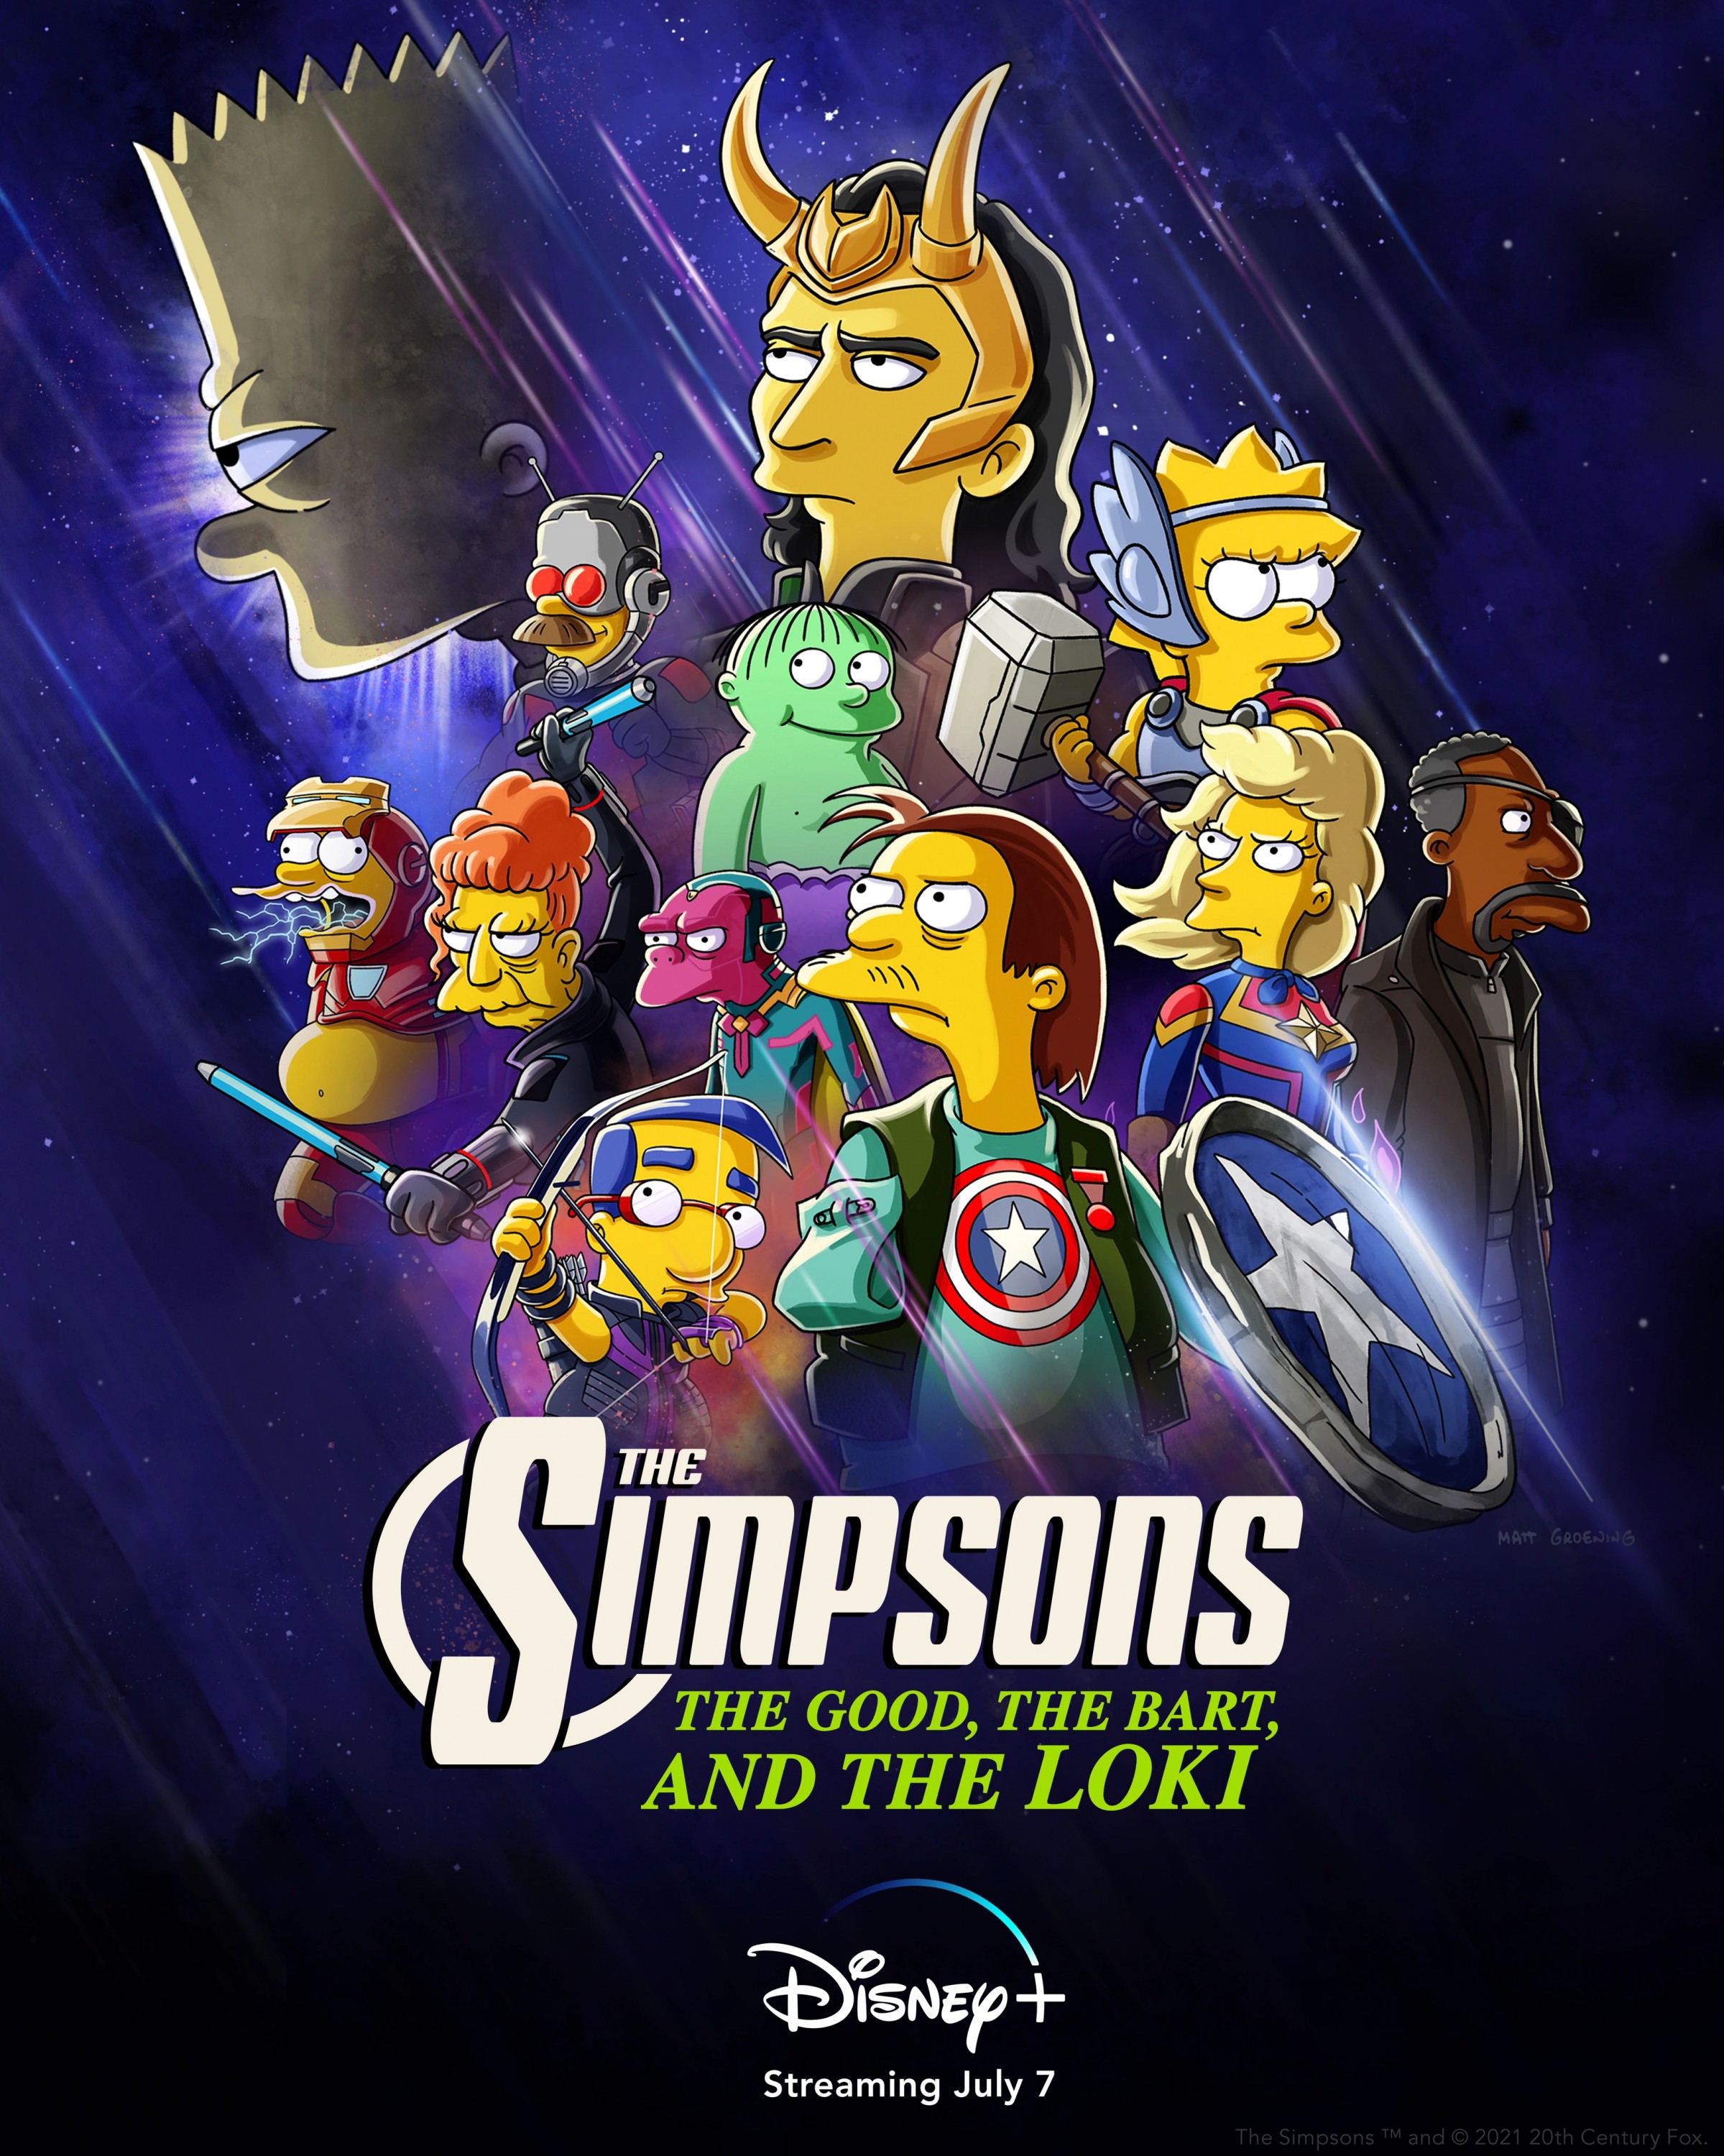 Mega Sized Movie Poster Image for The Good, the Bart, and the Loki